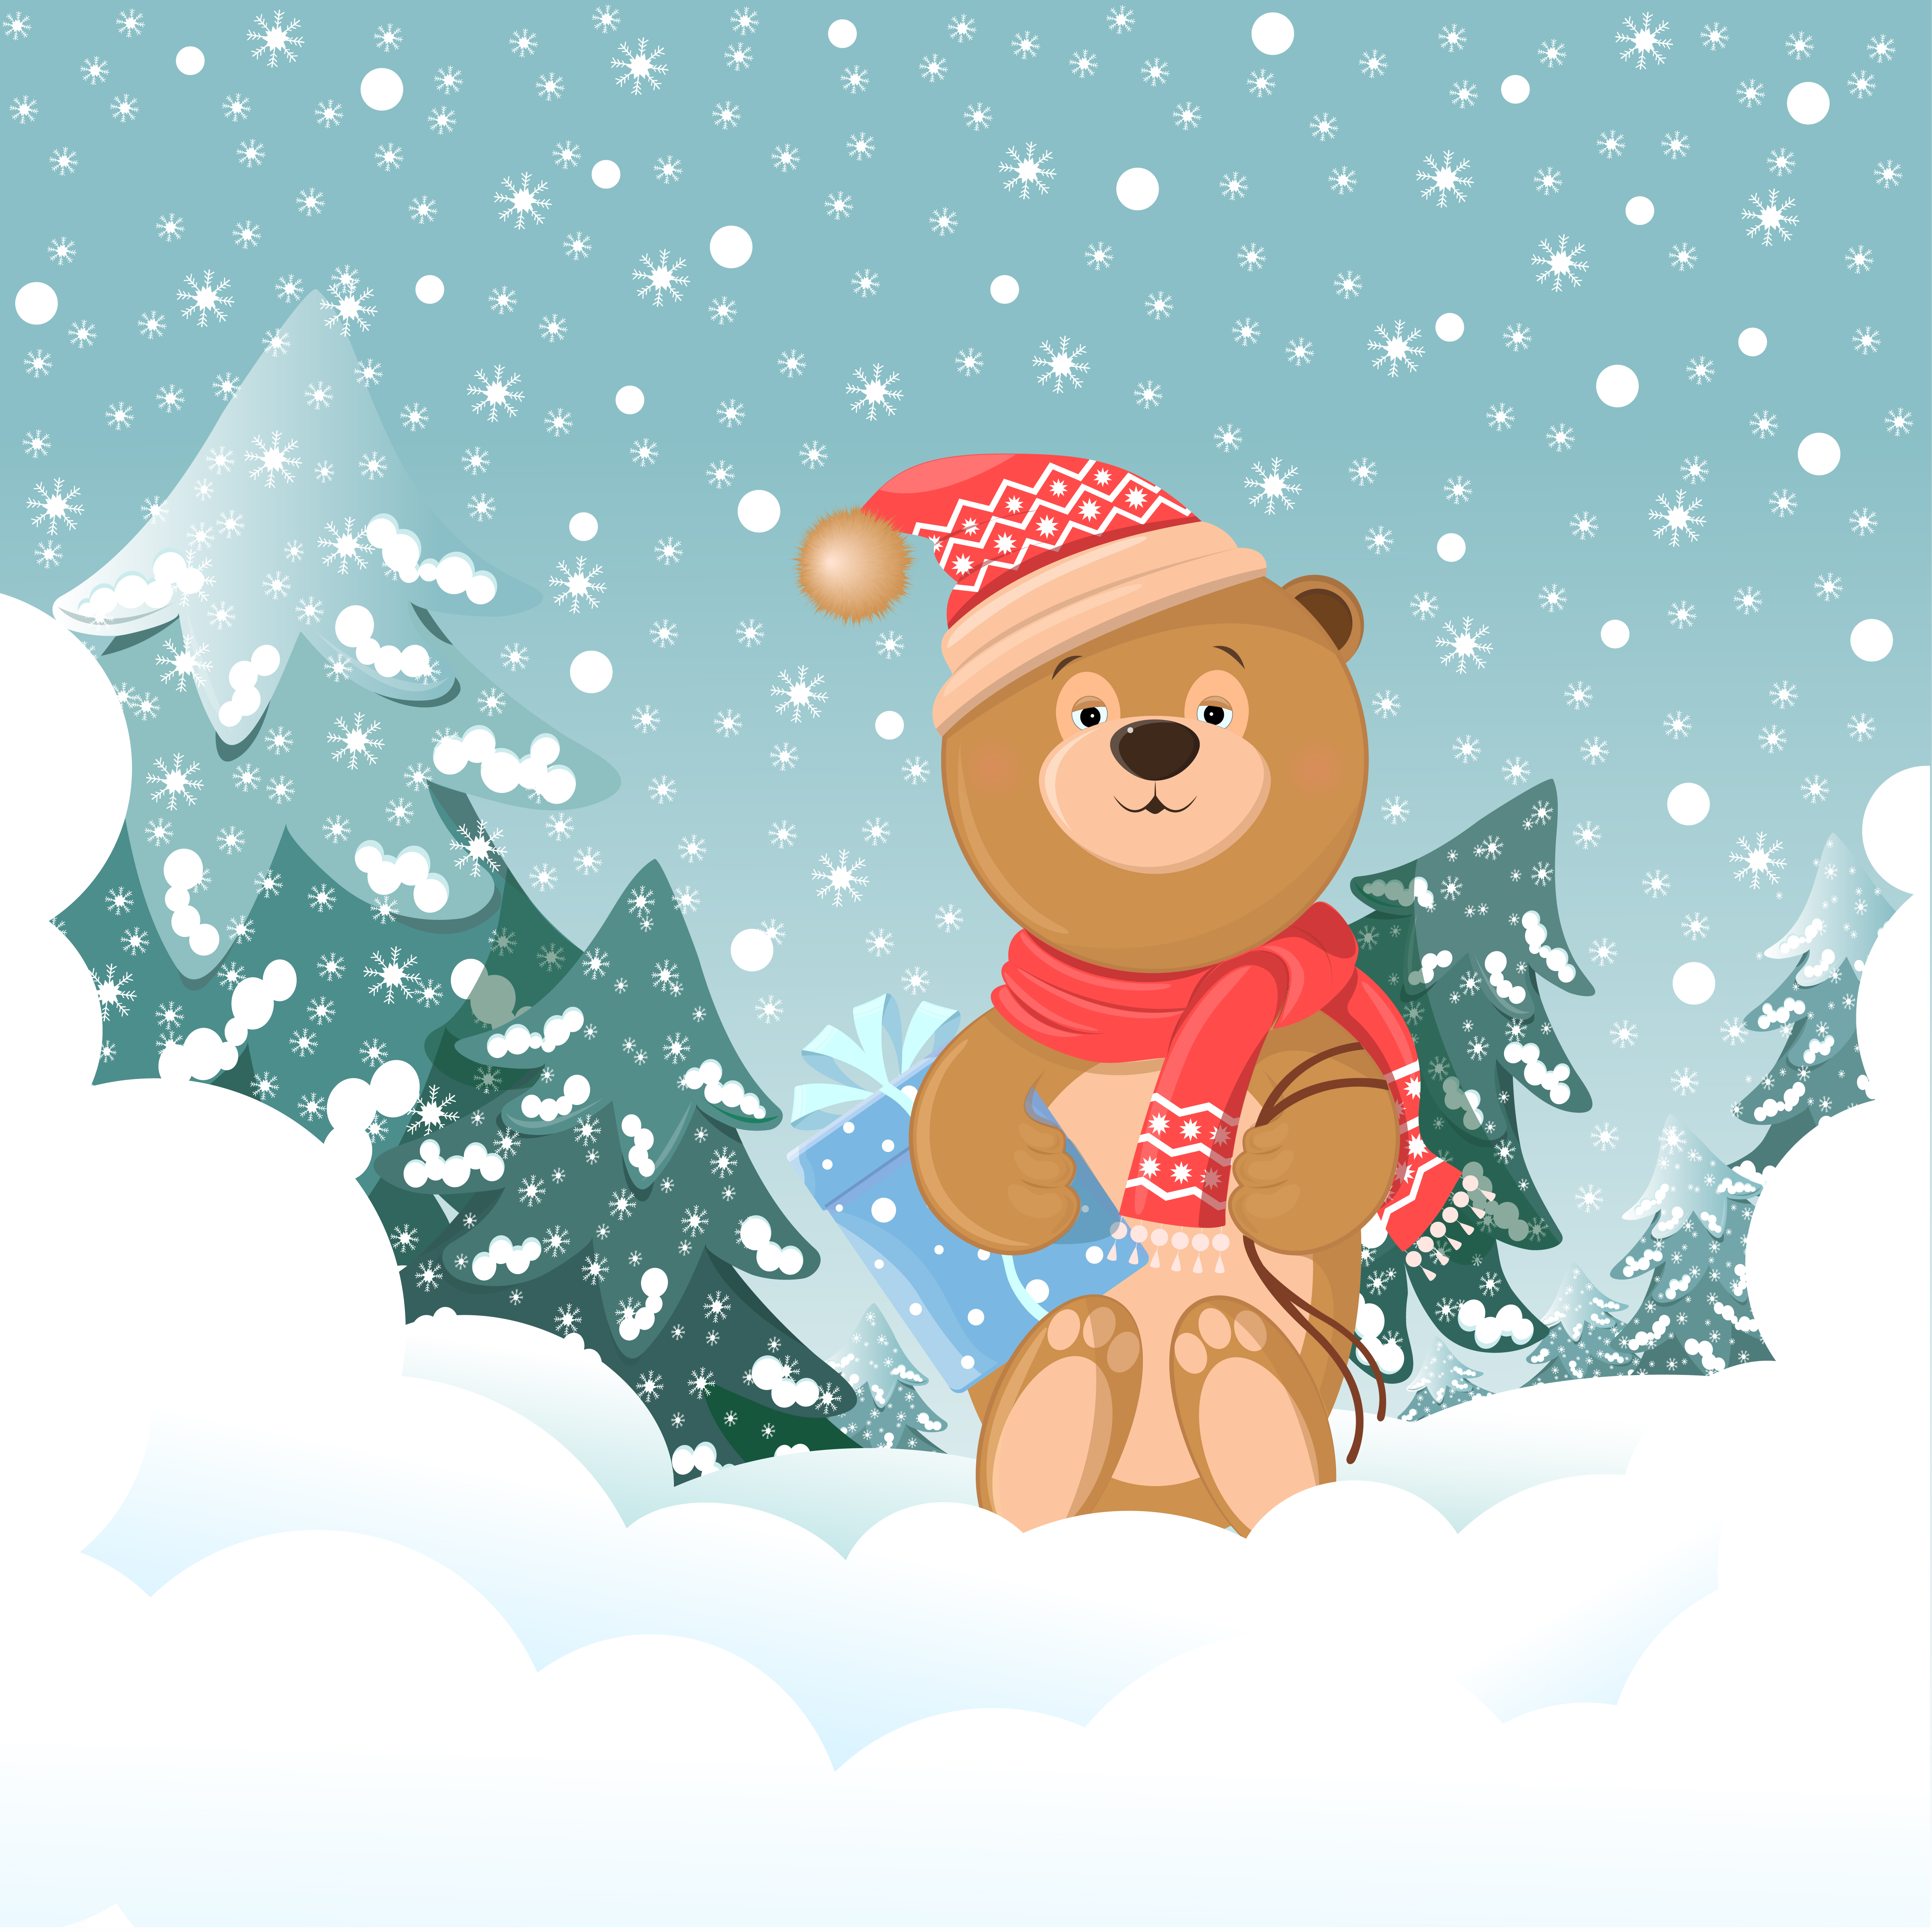 New year s winter forest with a bear and a gift